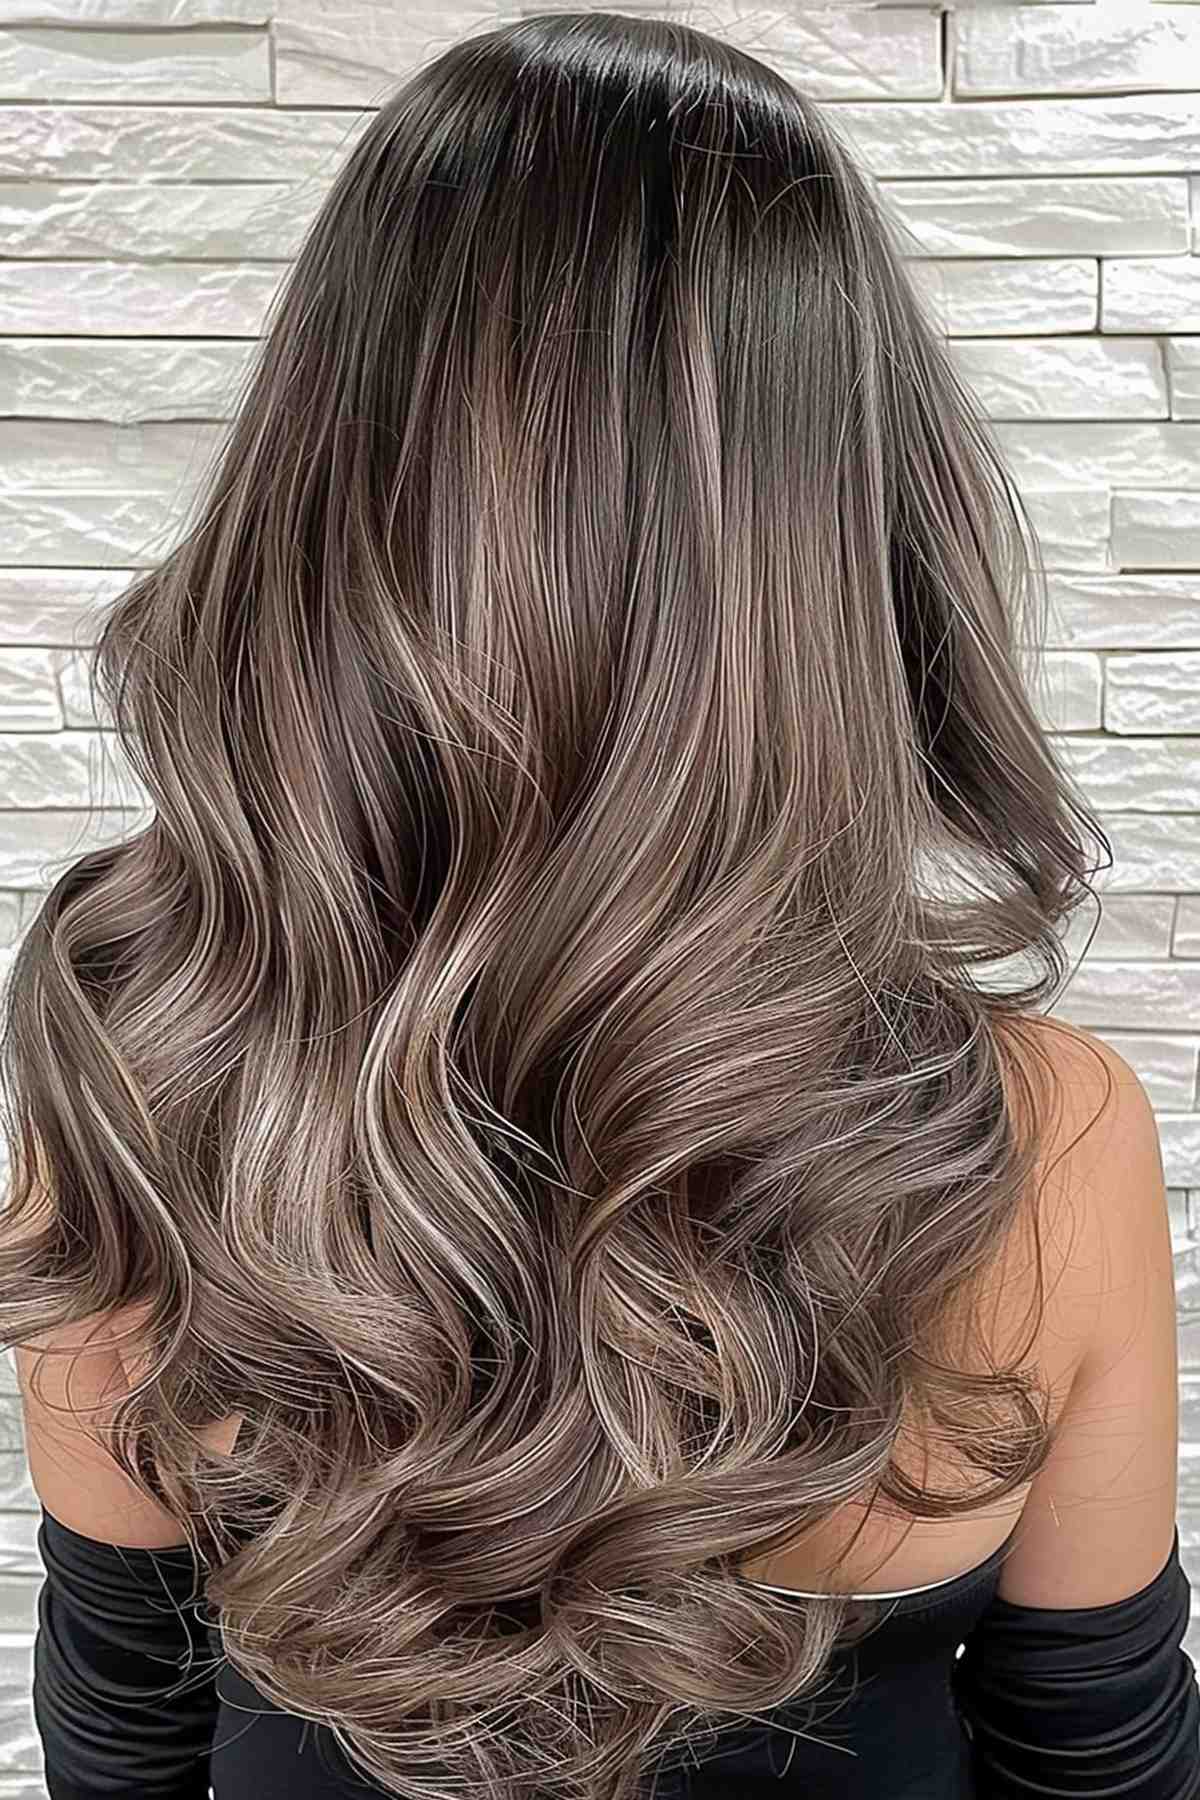 Long mushroom brown hair styled in soft waves, featuring subtle lowlights that enhance depth and texture for a rich, voluminous look.